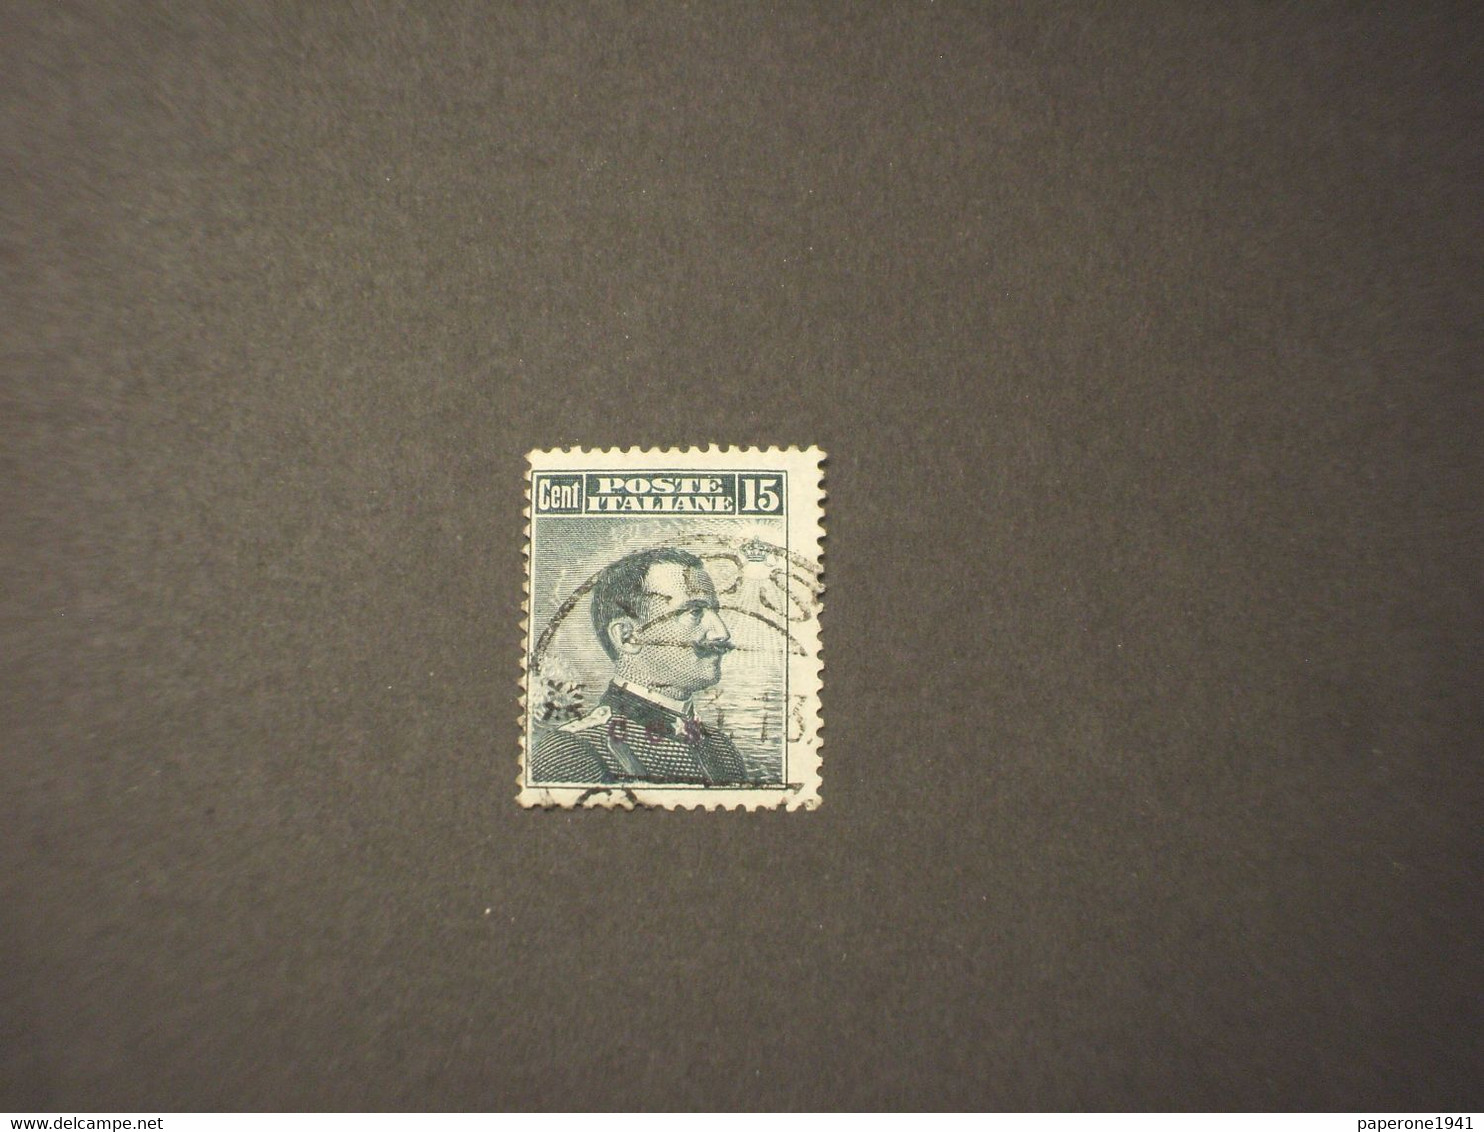 EGEO - COS - 191 RE  15 C. - TIMBRATO/USED - Egée (Coo)